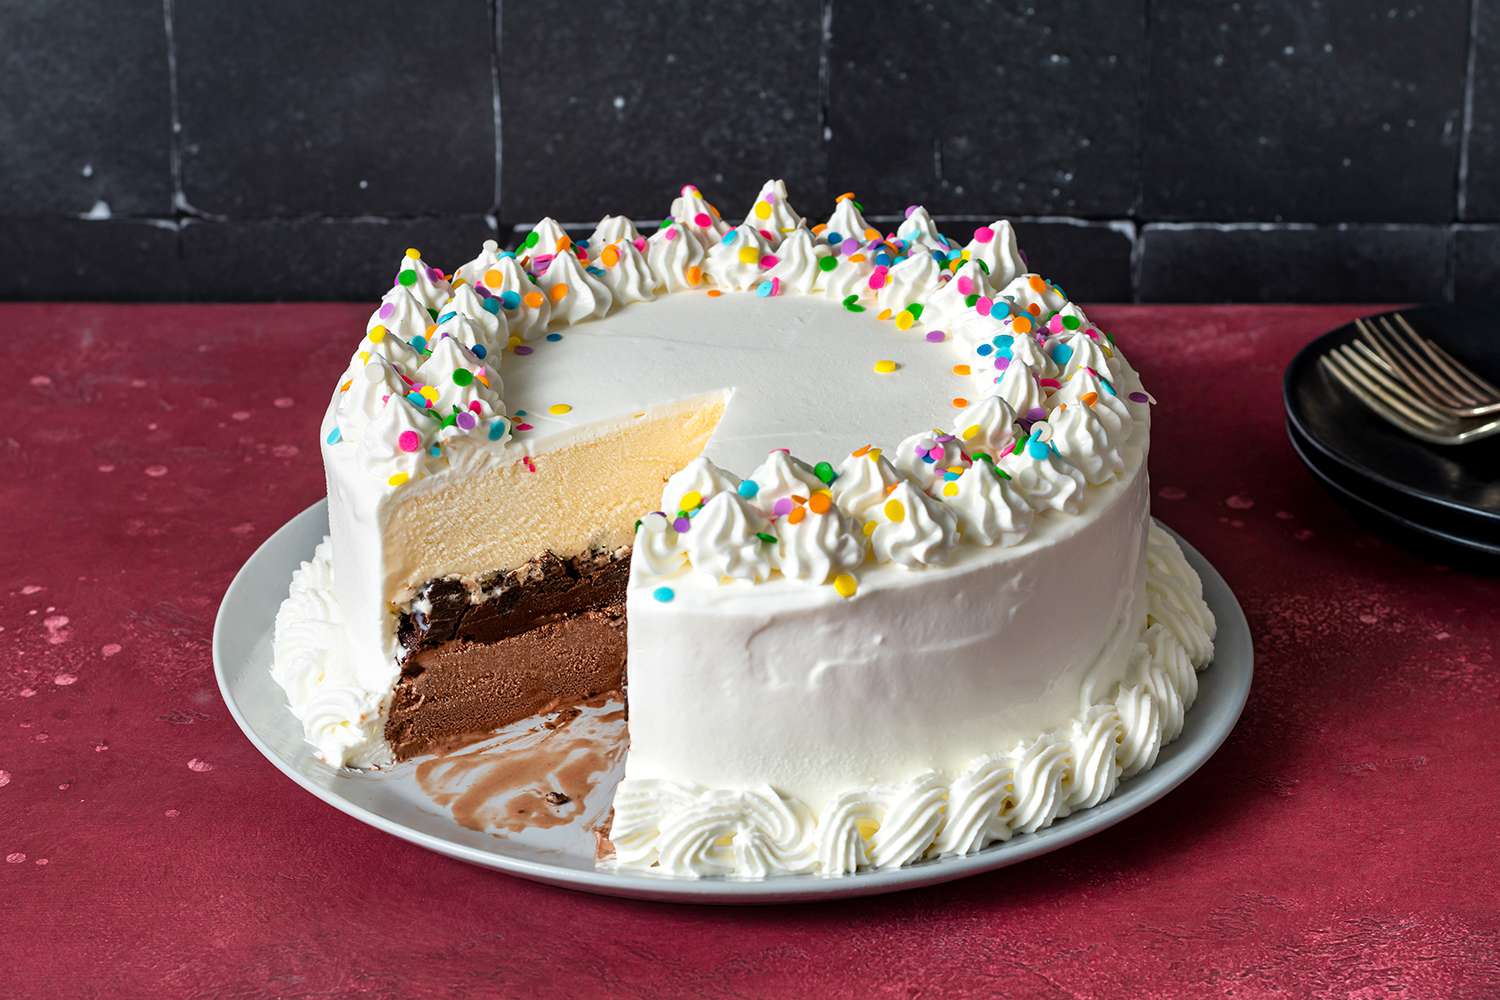 The Flavors of ice cream cakes from Dairy Queen